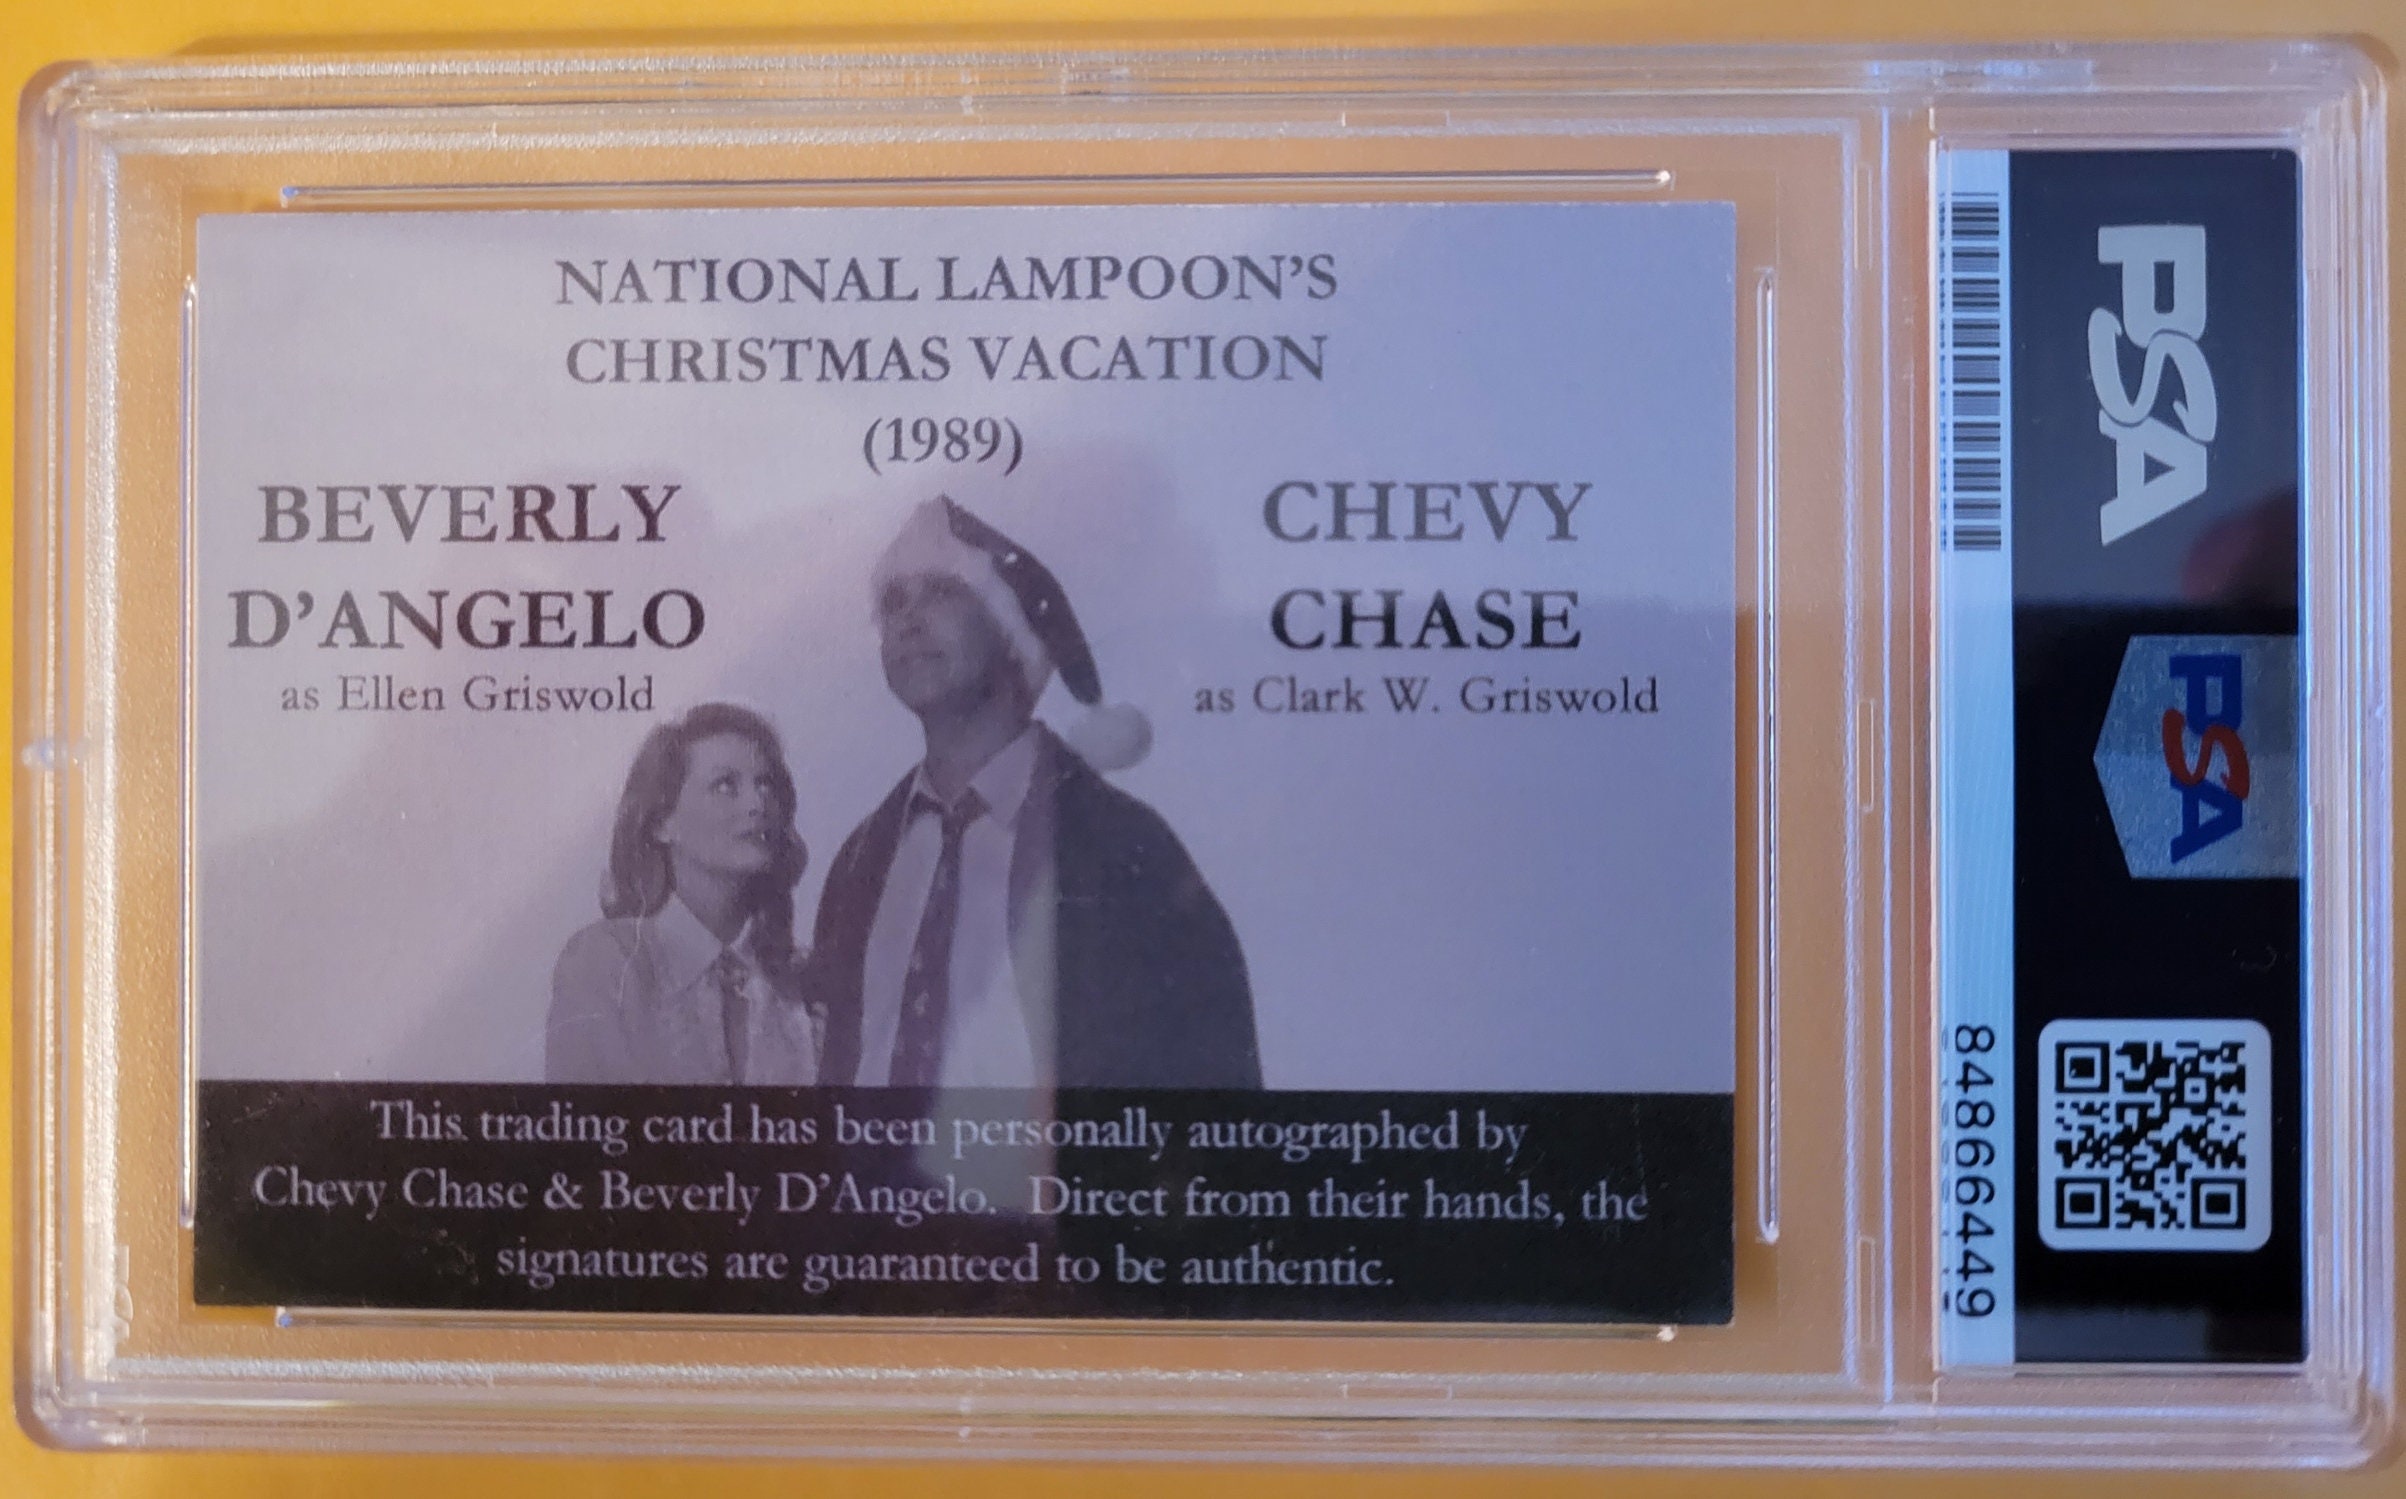 Chevy Chase & Beverly D'Angelo Signed National Lampoon's